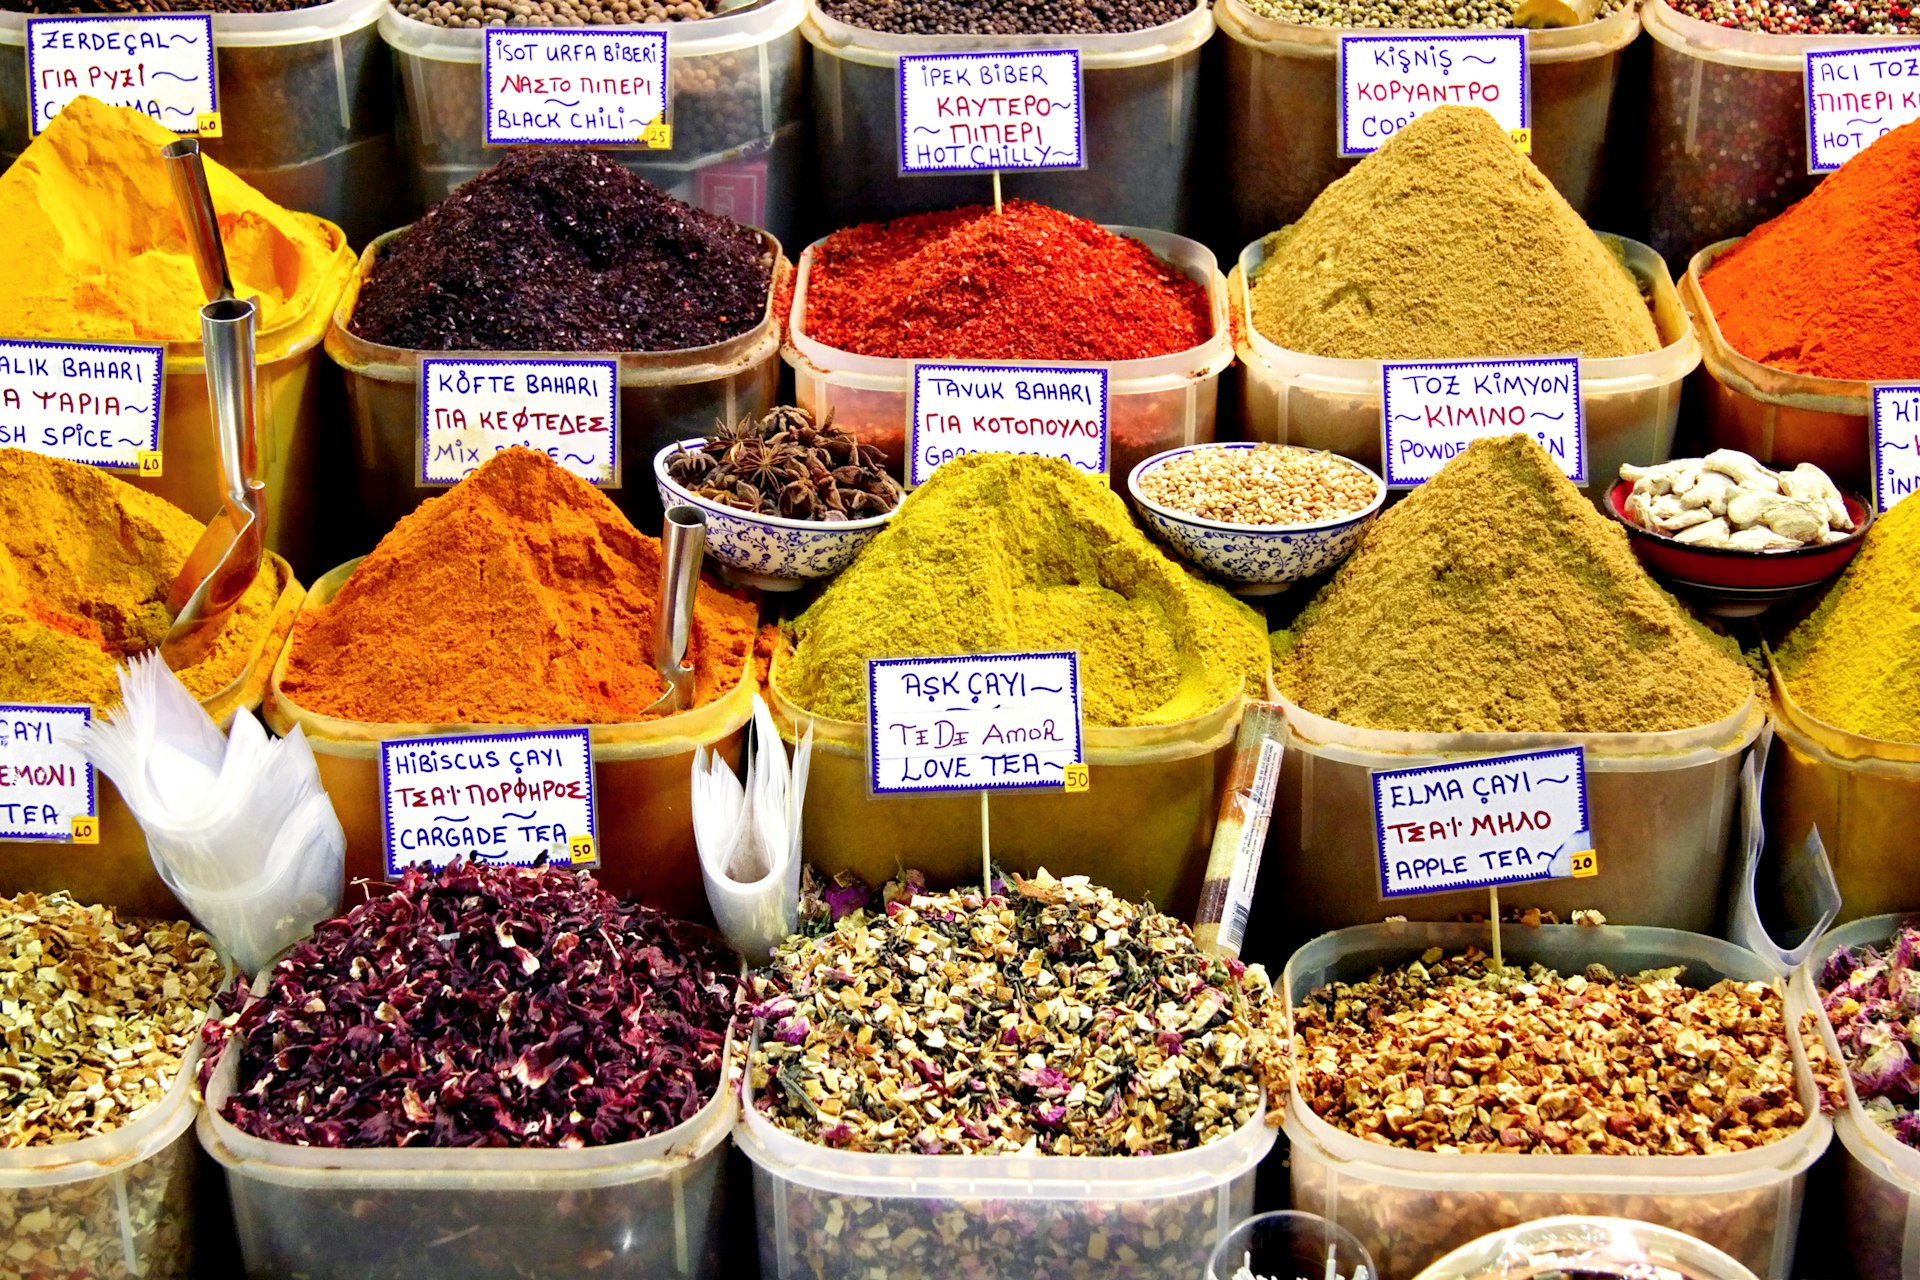 A display of containers containing many different spices in the Spice Bazaar in Istanbul